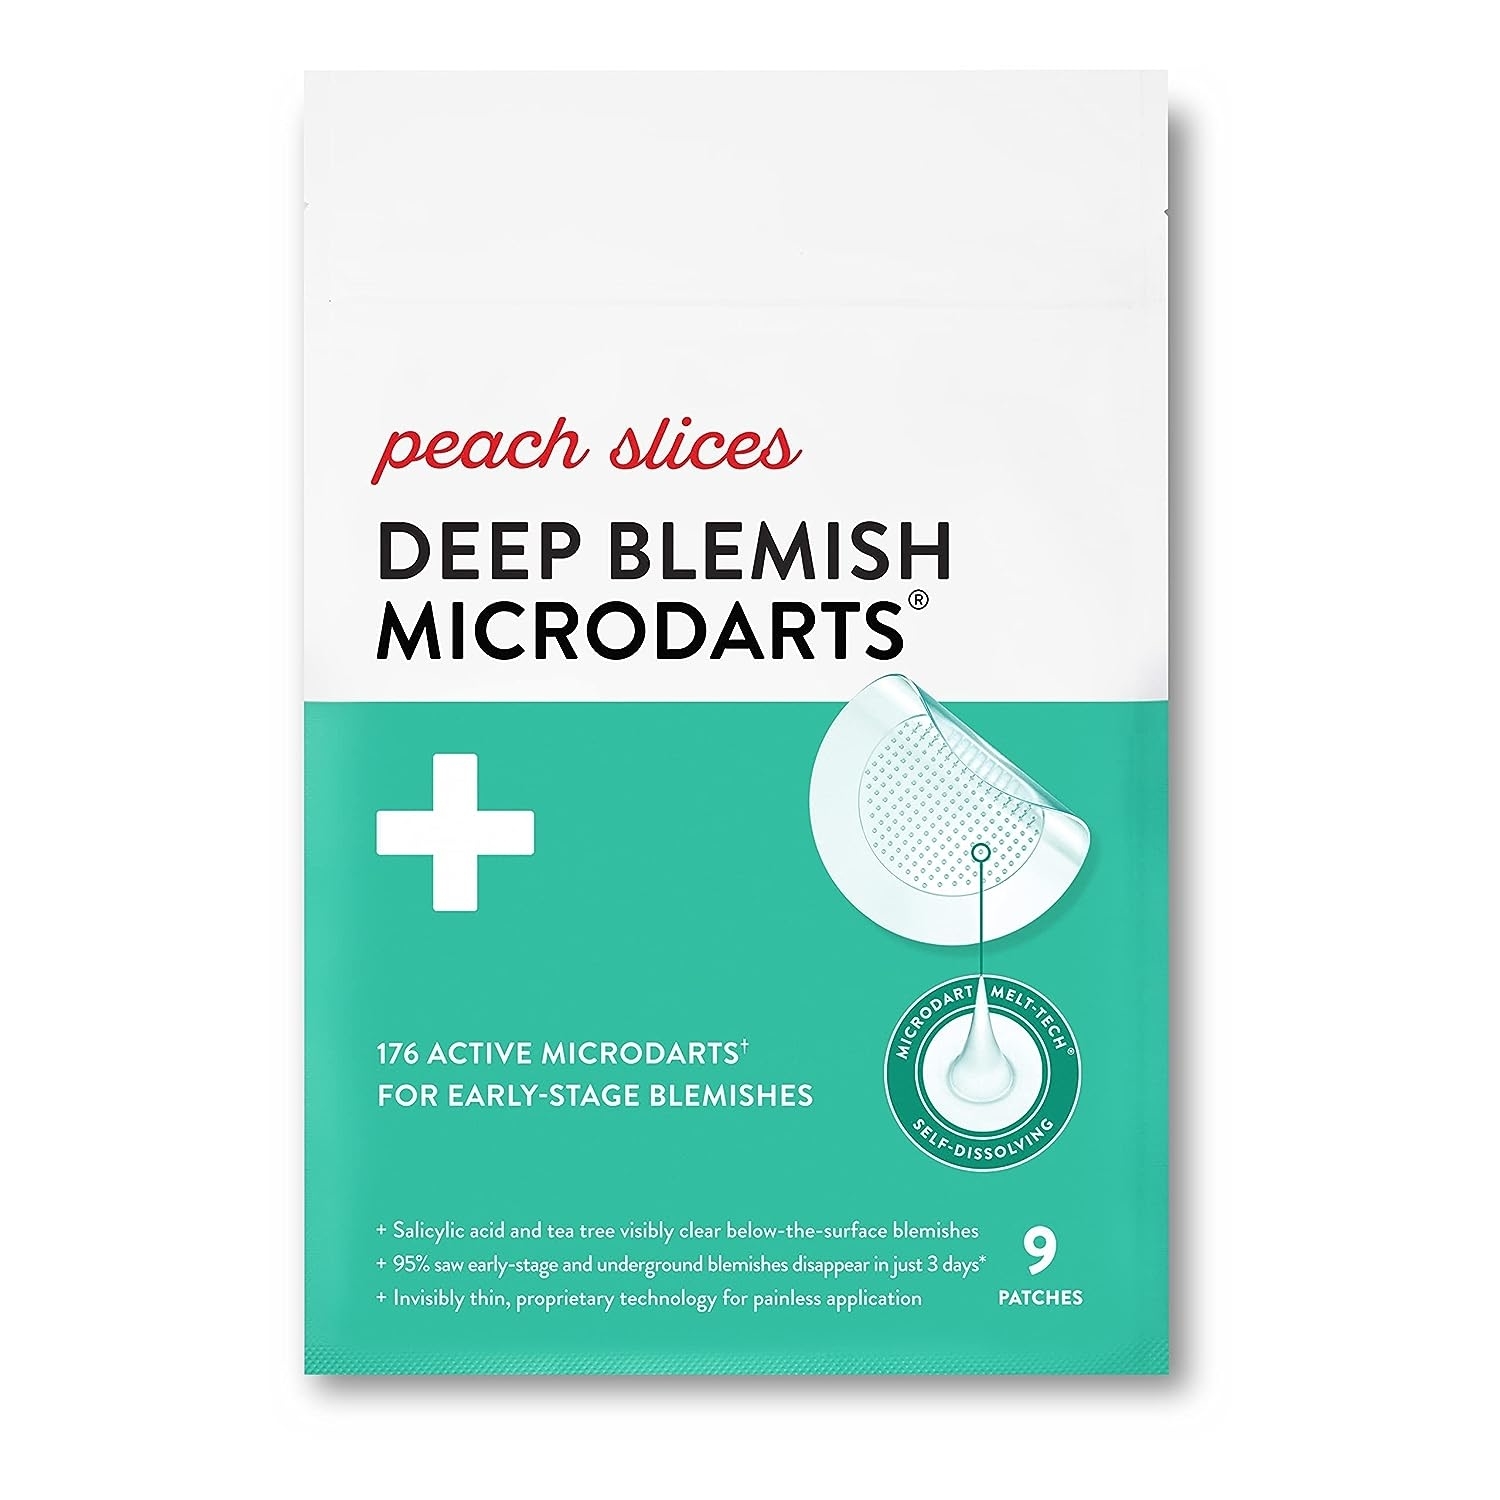 Product packaging for Peach Slices Deep Blemish Microdarts patches